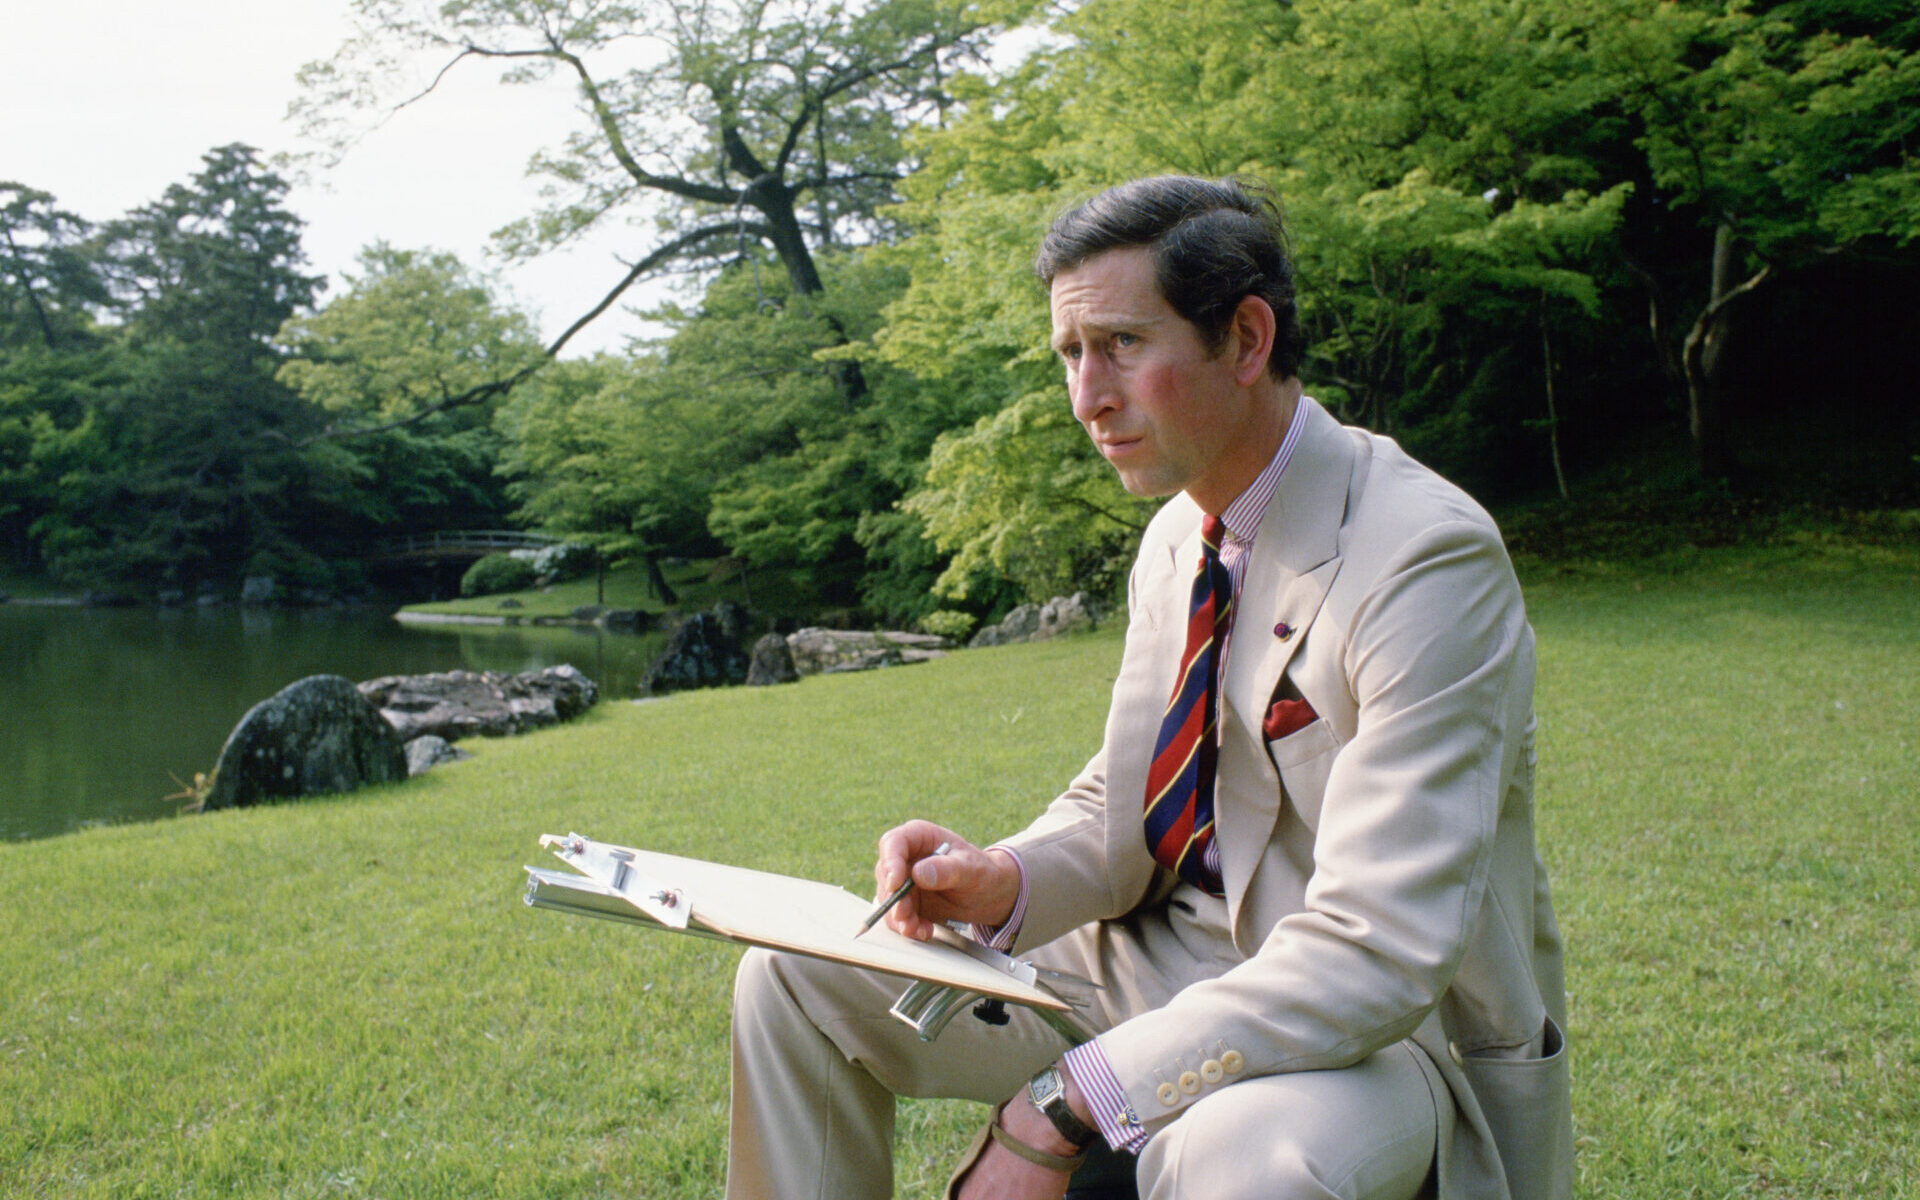 JAPAN - MAY 08: Prince Charles sketching in the gardens of Omiya Palace during a break in his official tour of Japan. (Photo by Tim Graham Photo Library via Getty Images)